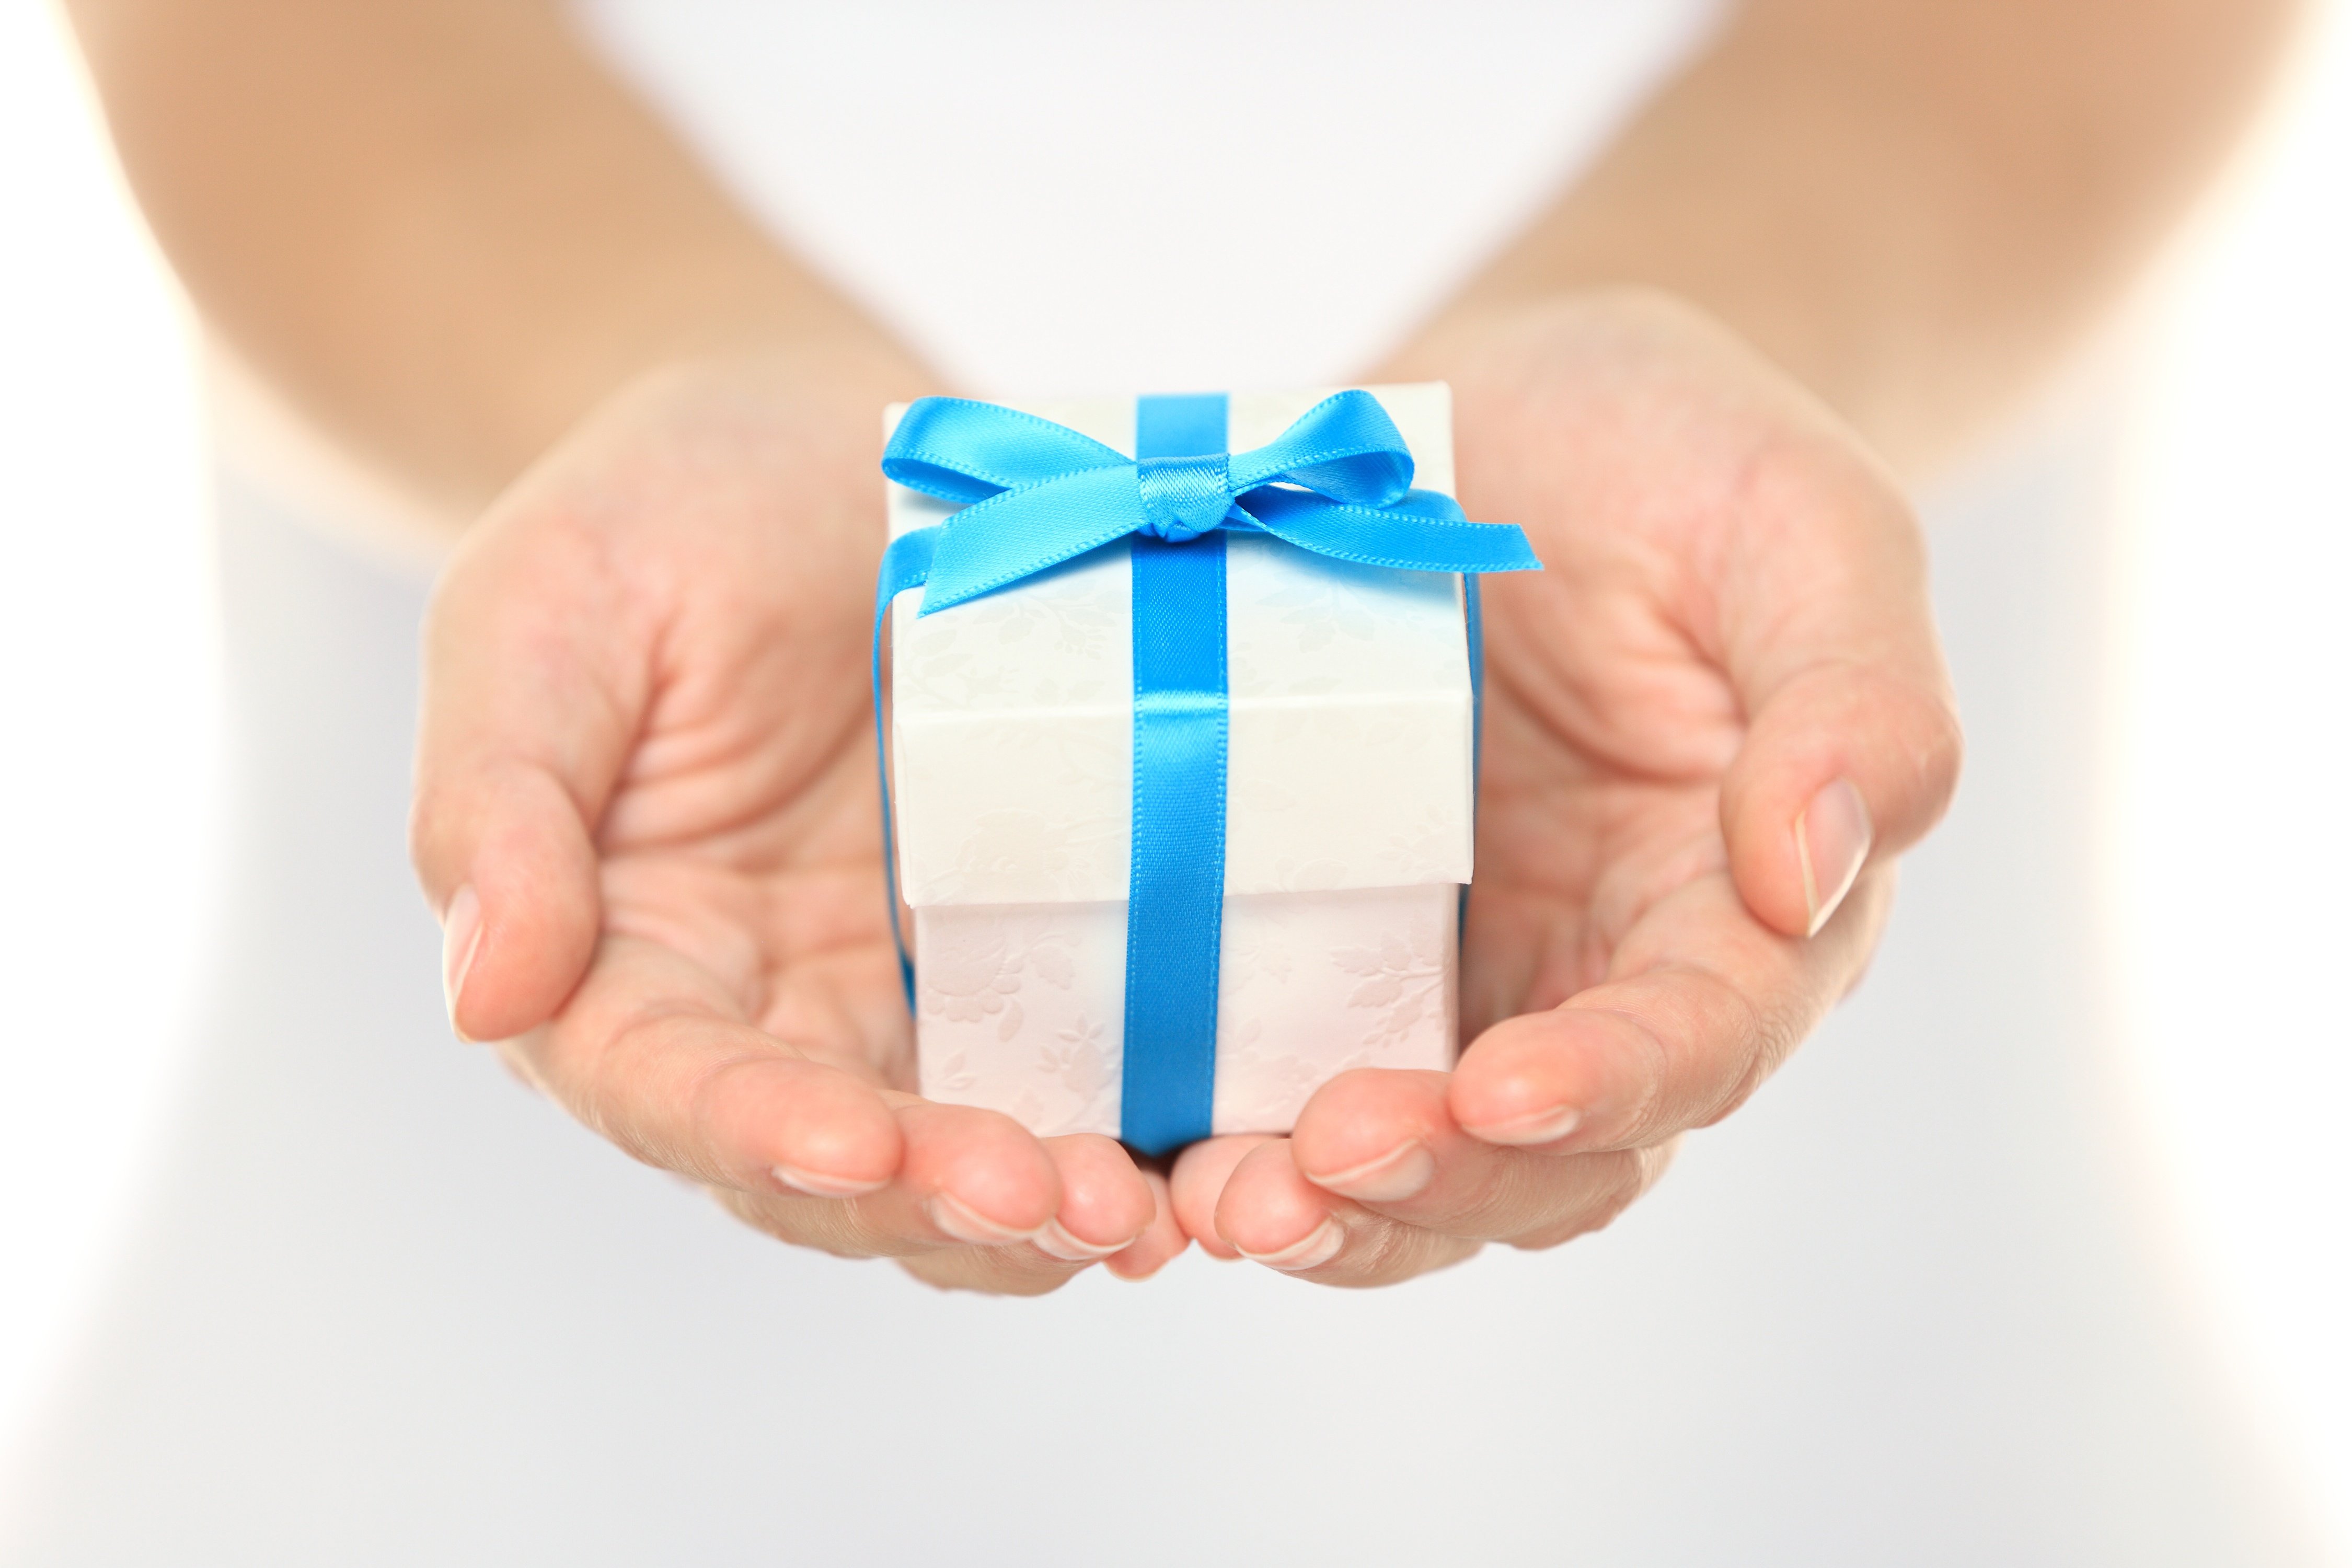 10 Quotes That Inspire The Spirit of Giving